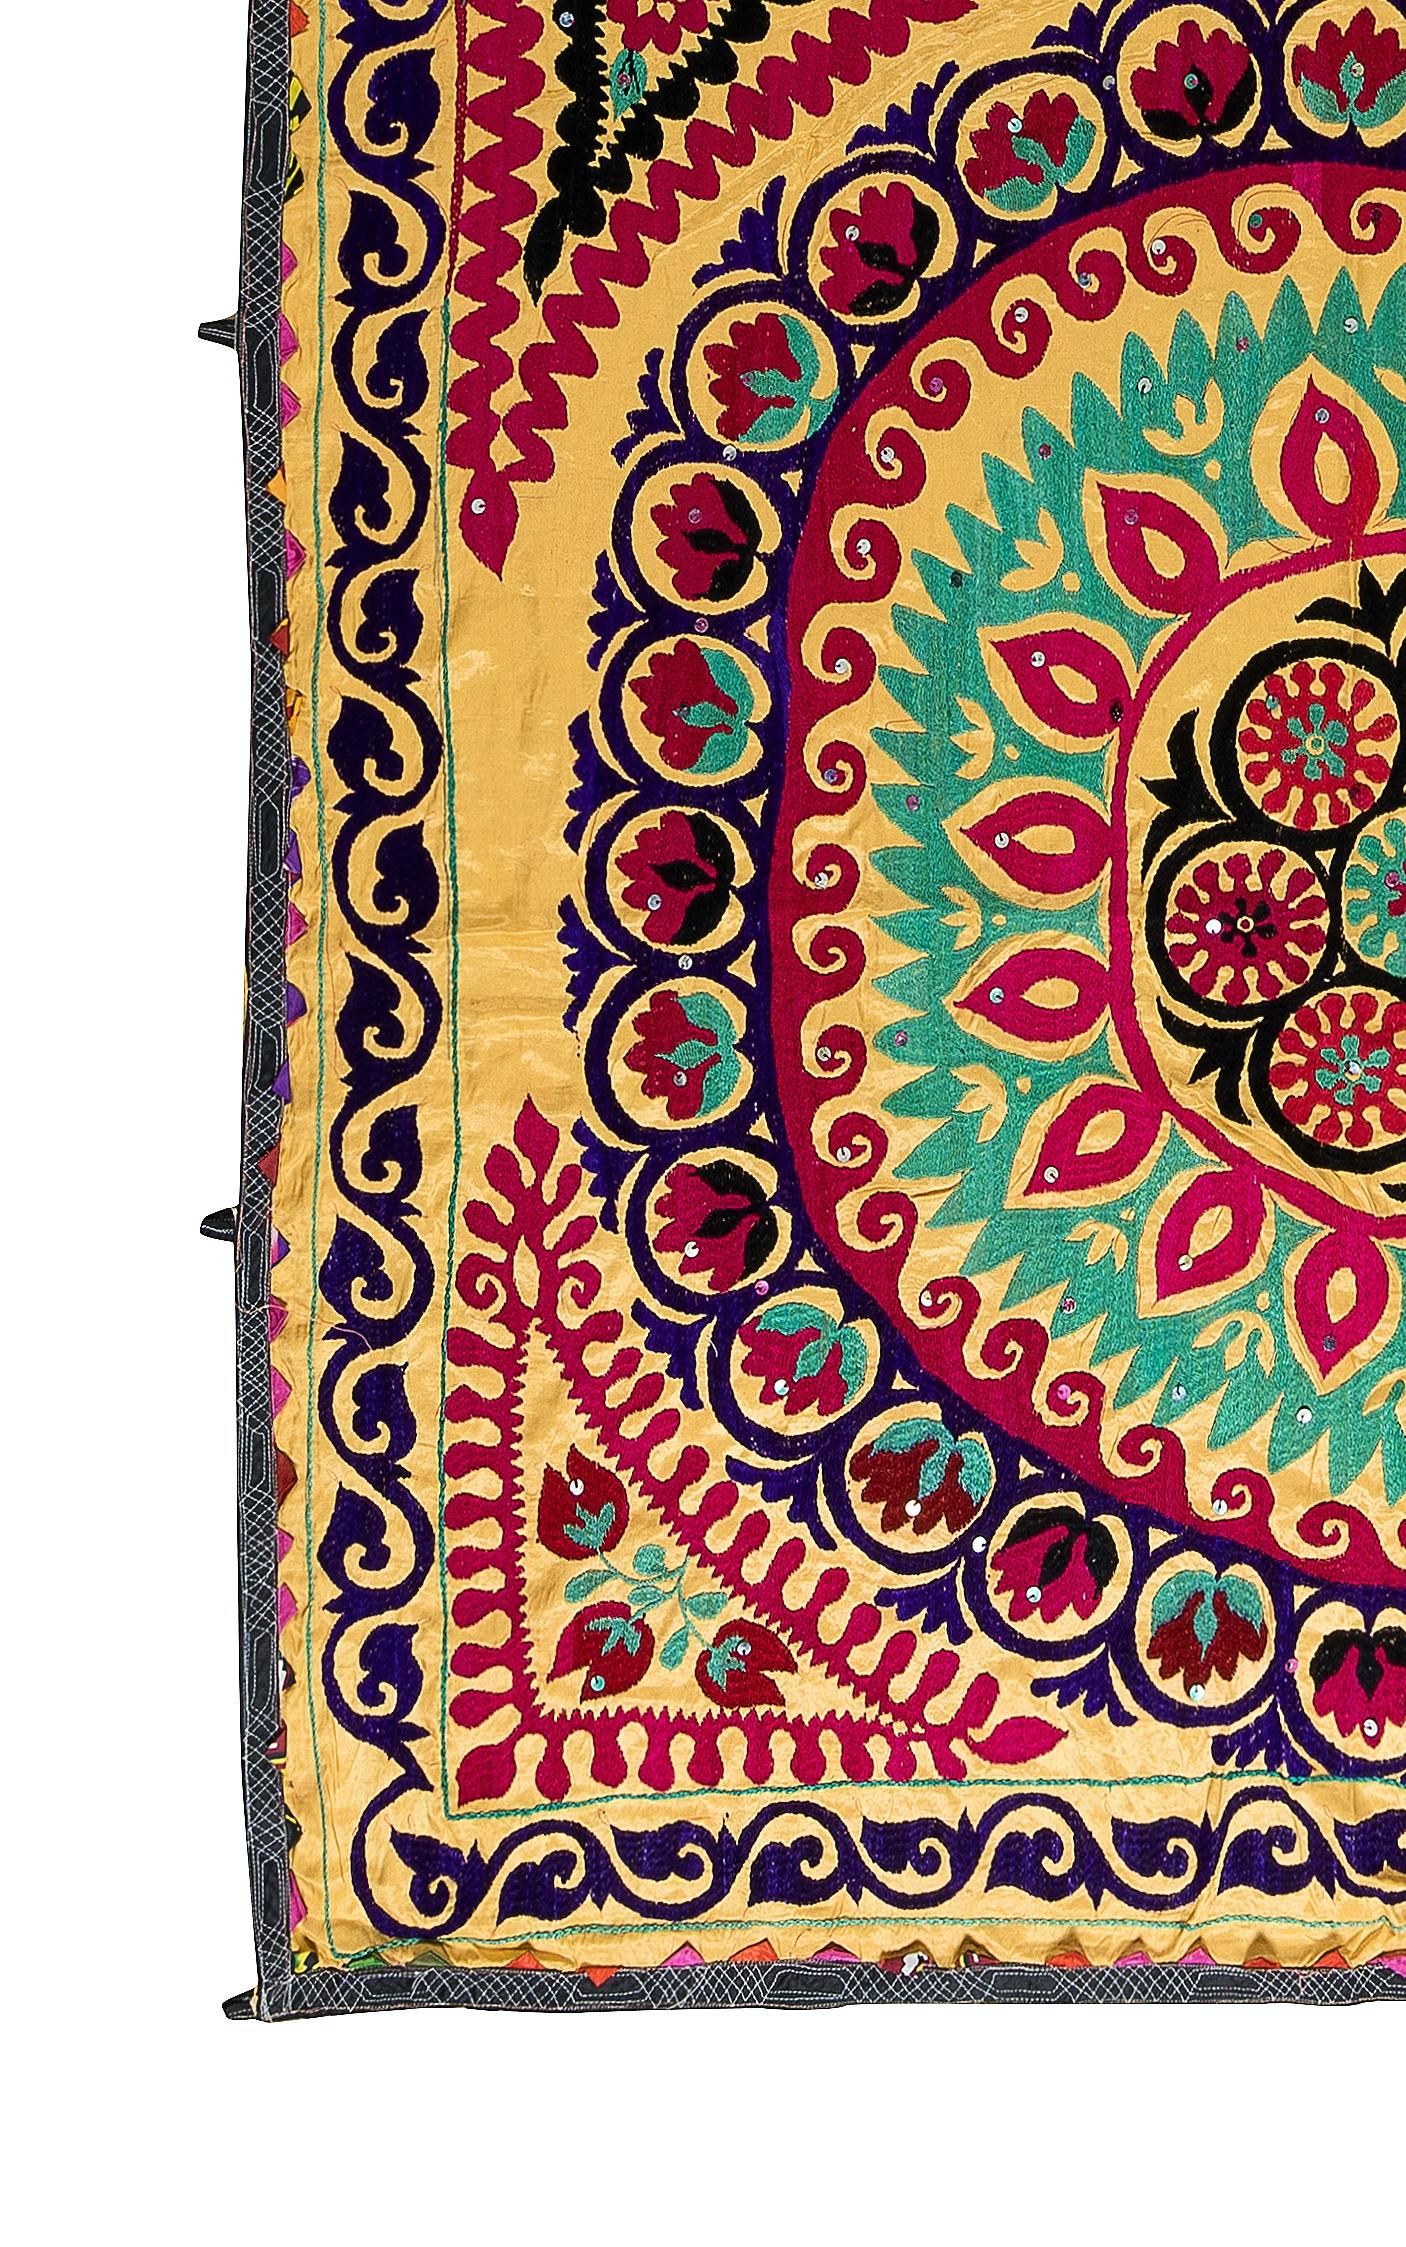 Embroidered 5x7.7 Ft Vintage Silk Embroidery Bed Cover, Uzbek Suzani Fabric Wall Hanging For Sale